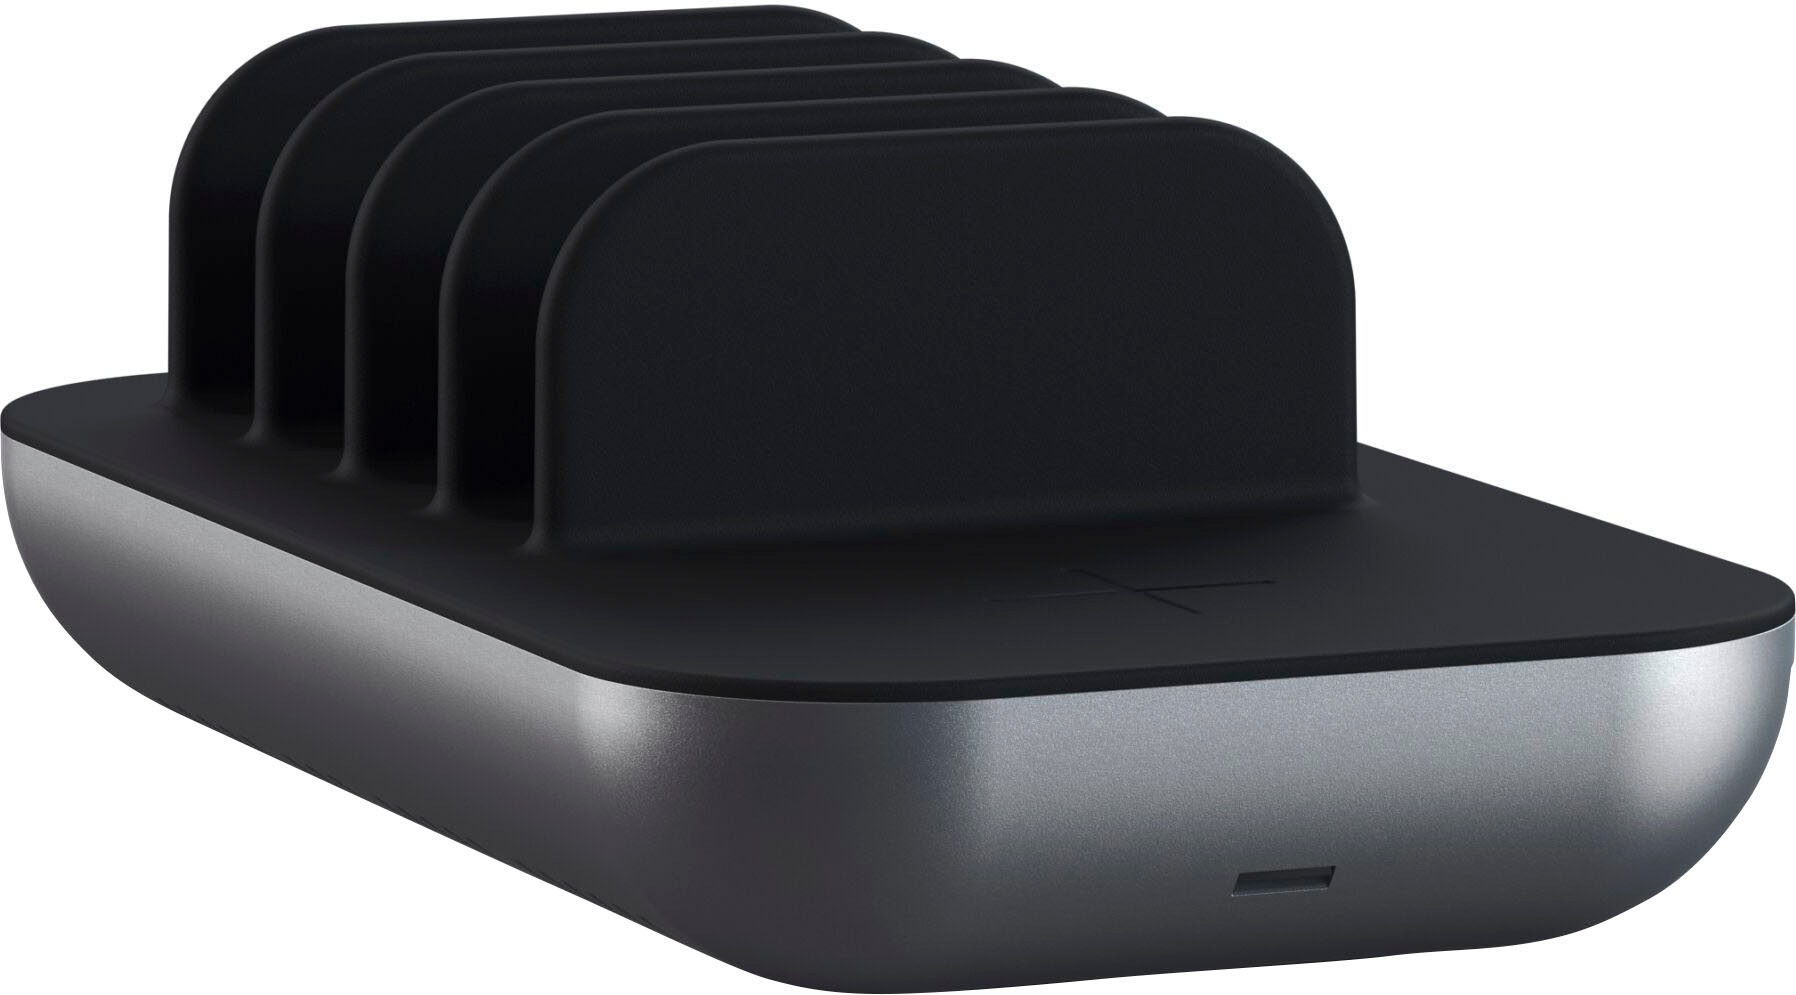 Satechi Wireless Charger »Dock5 Multi-Device Charging Station«, (1 St.)